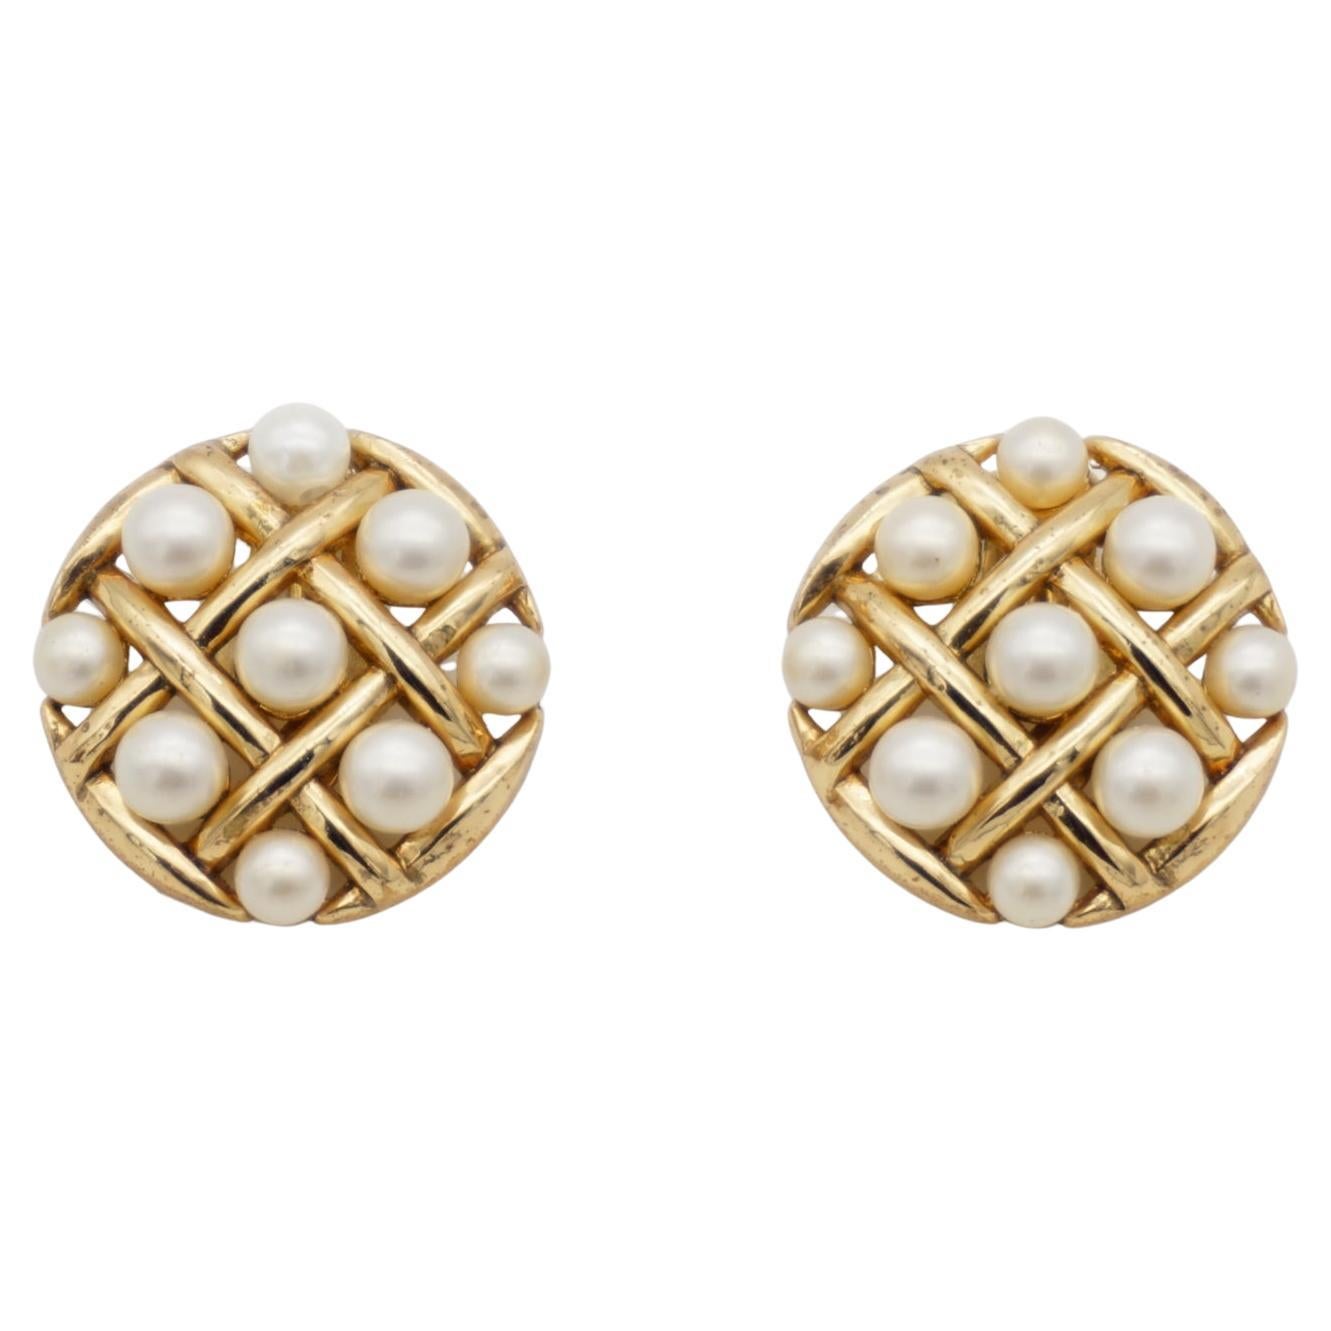 Crown Trifari 1950 Round Circle White Pearls Openwork Criss Cross Clip Earrings For Sale